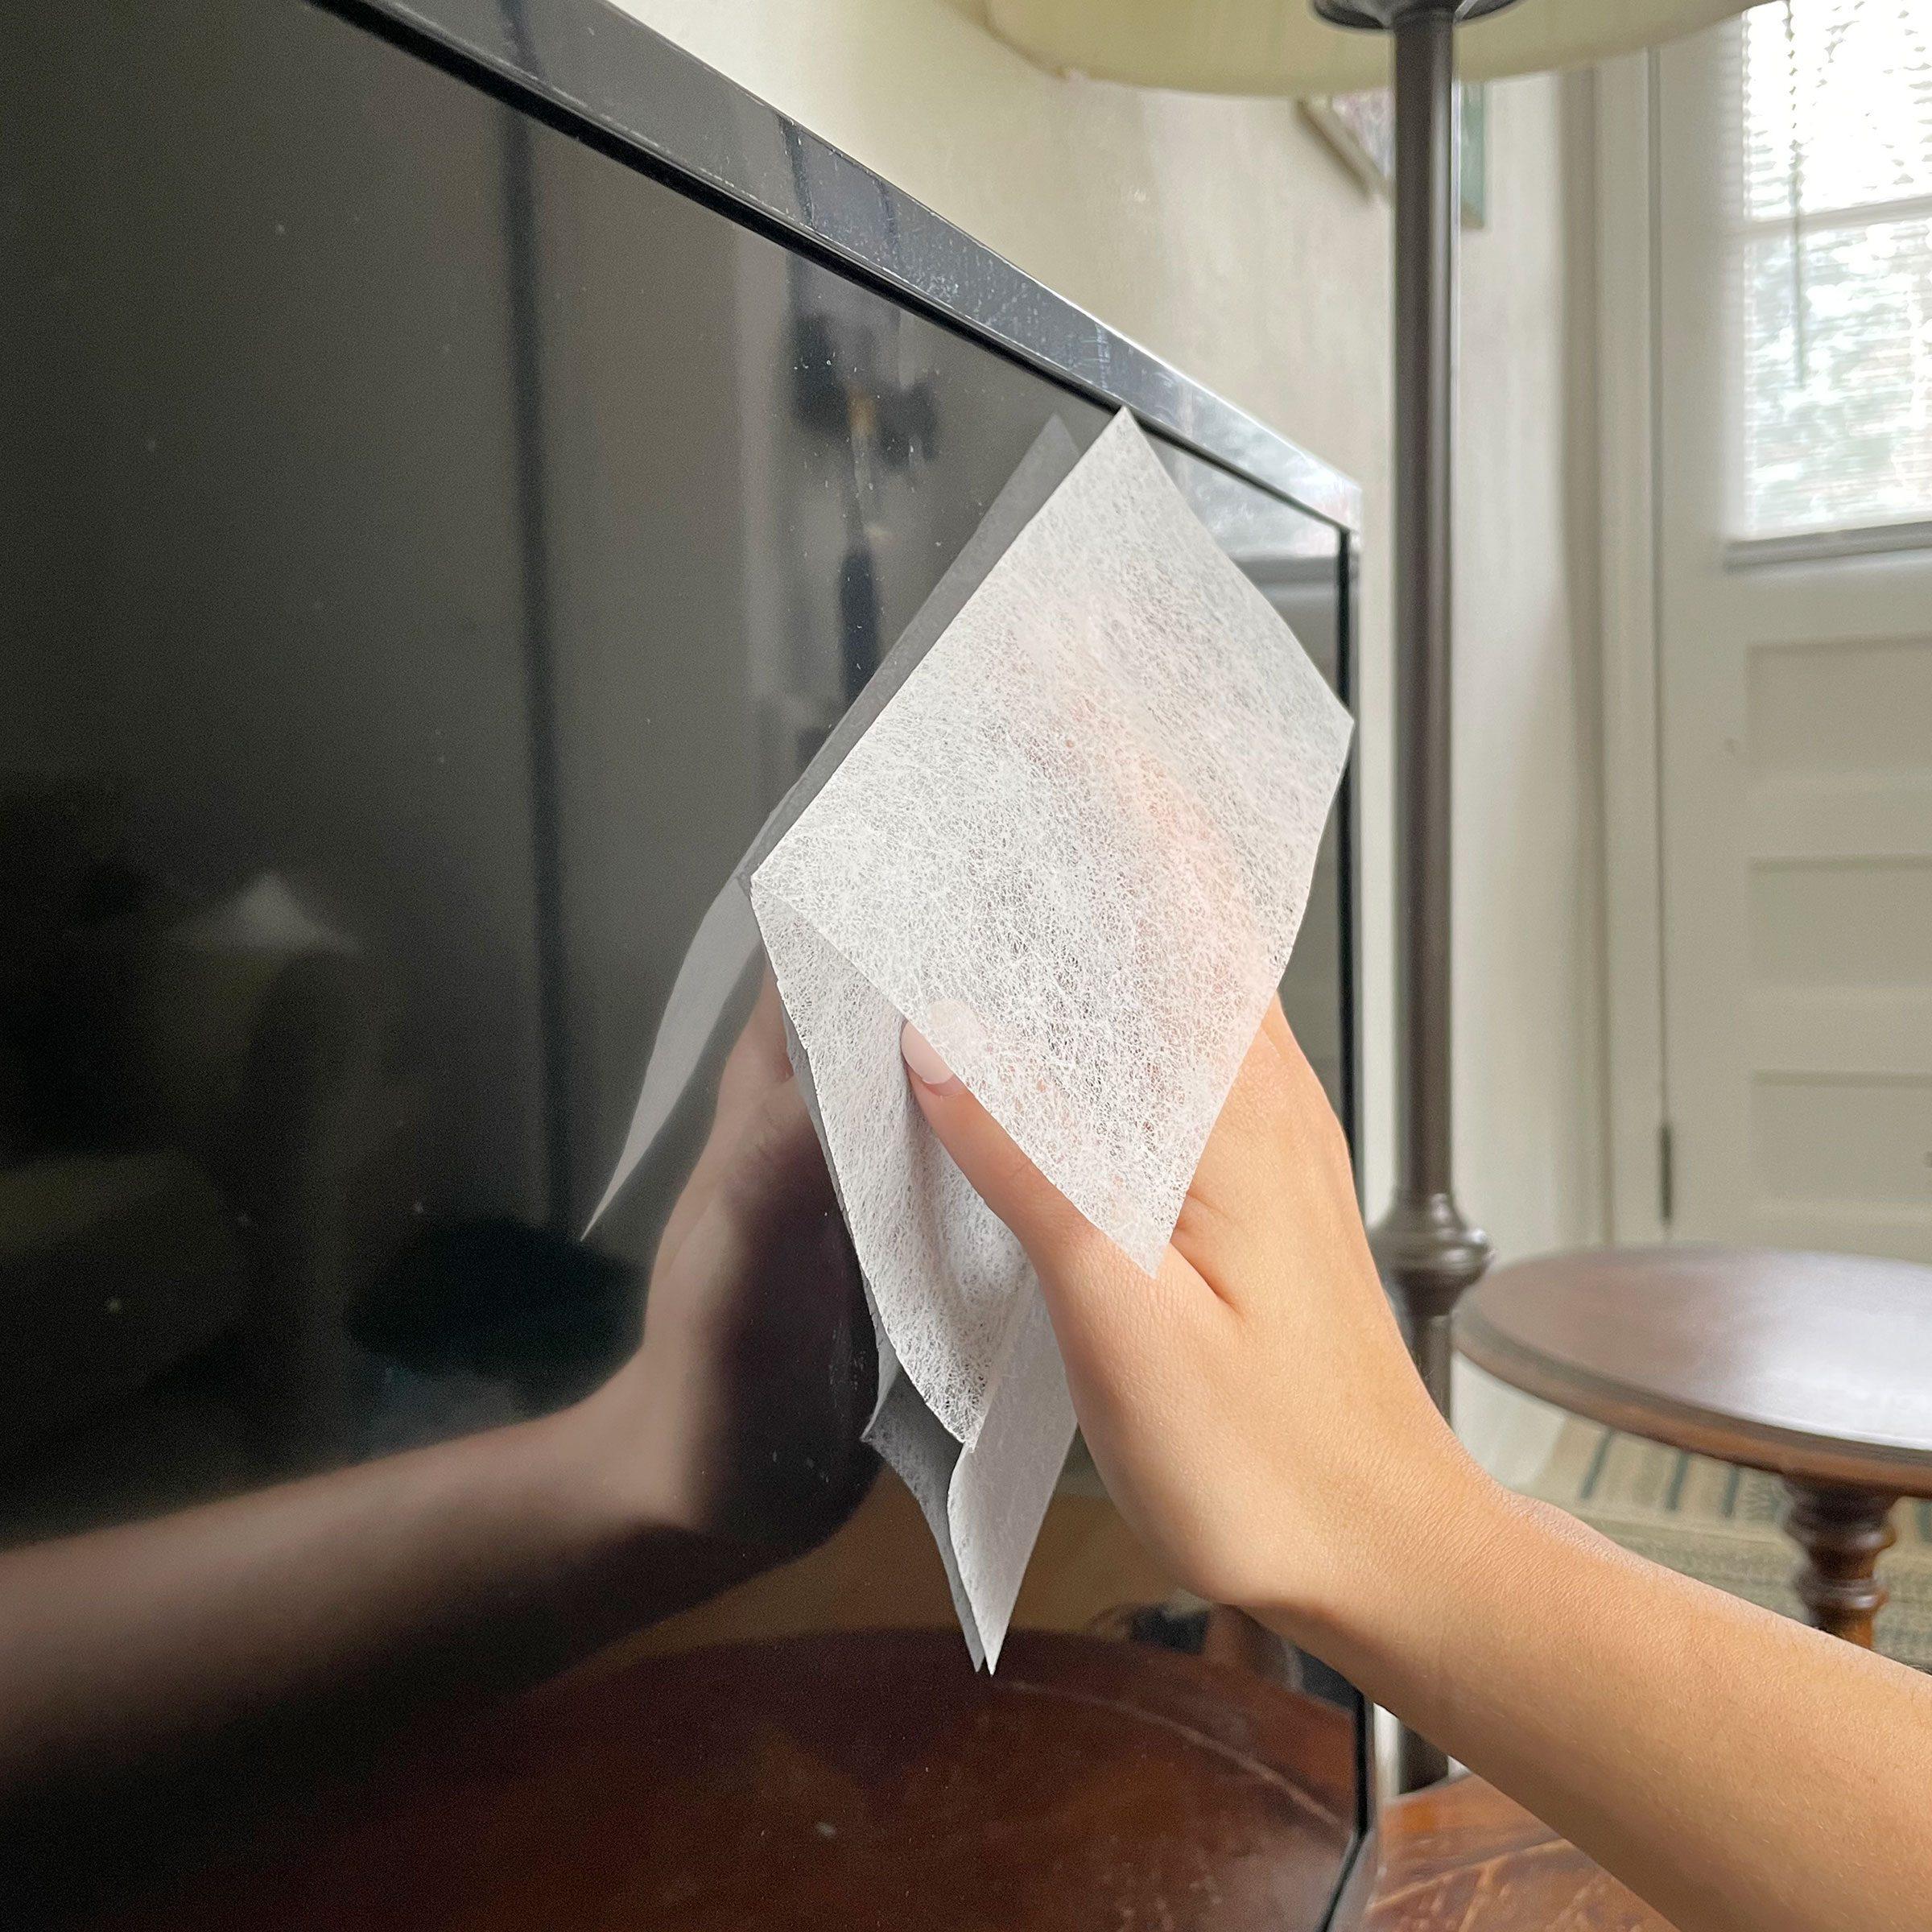 17 Surprising Dryer Sheet Hacks to Use Around the House